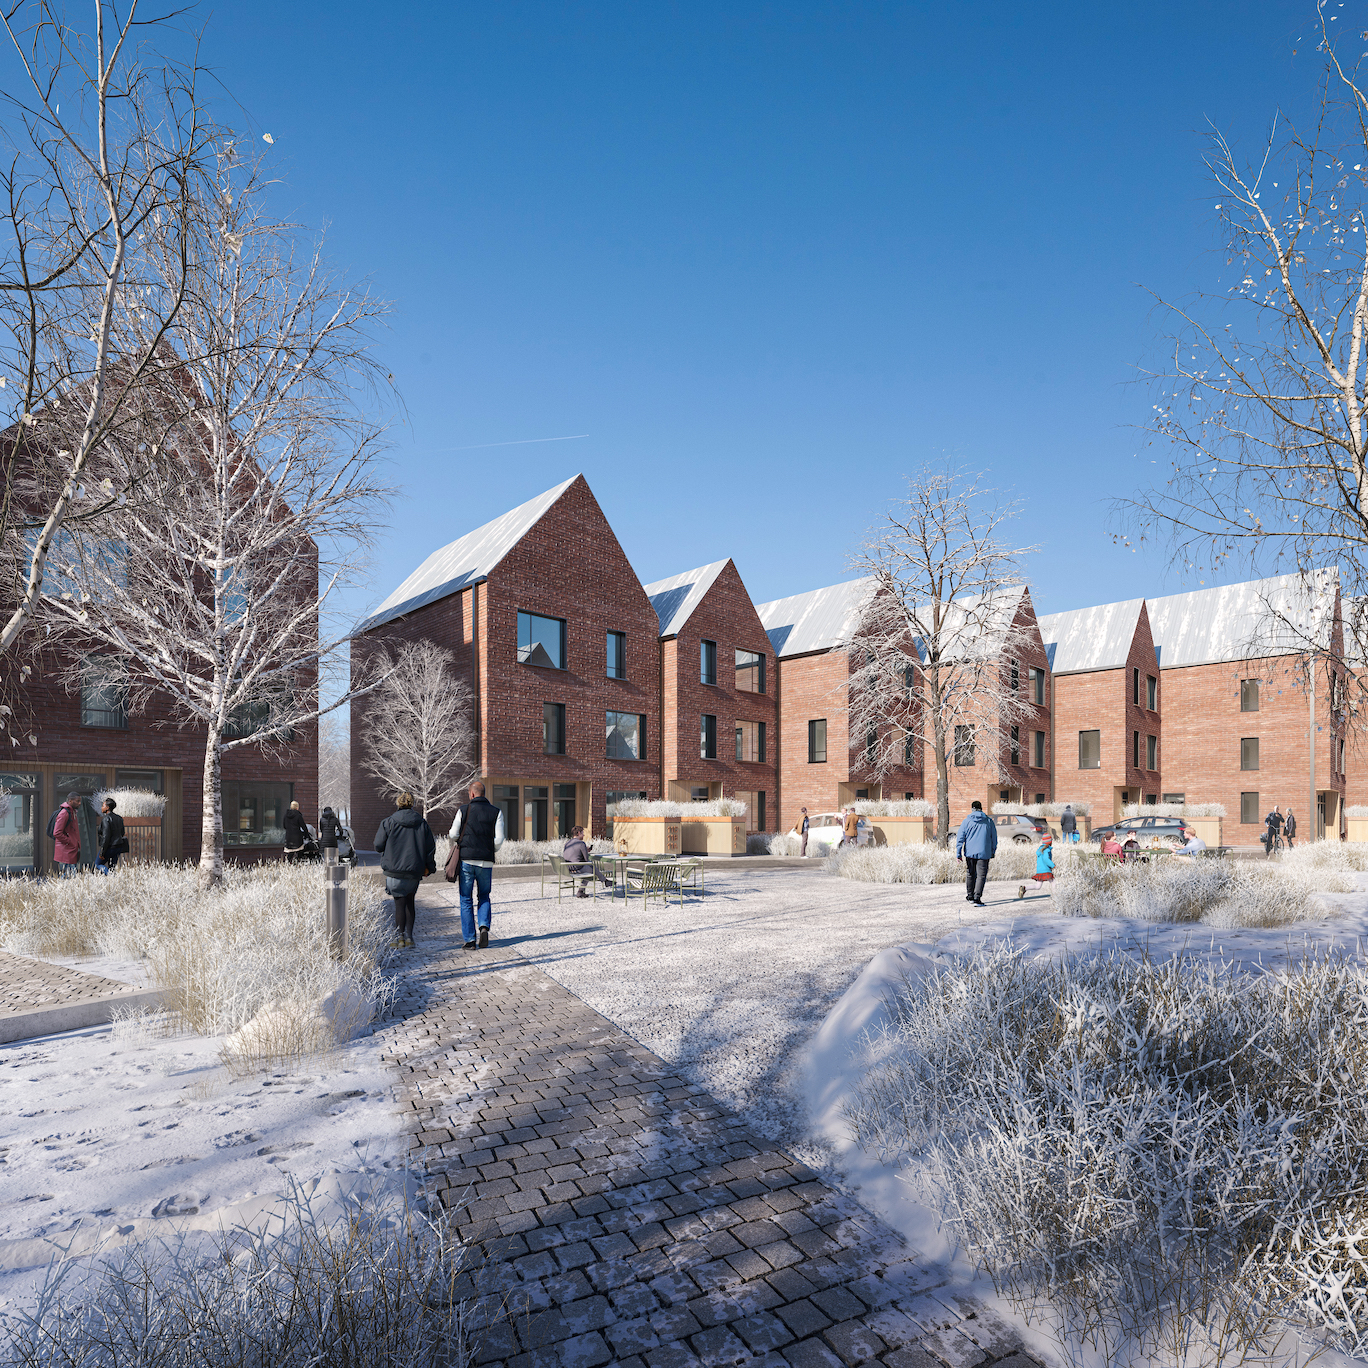 A row of brick buildings against a blue skin in the snow